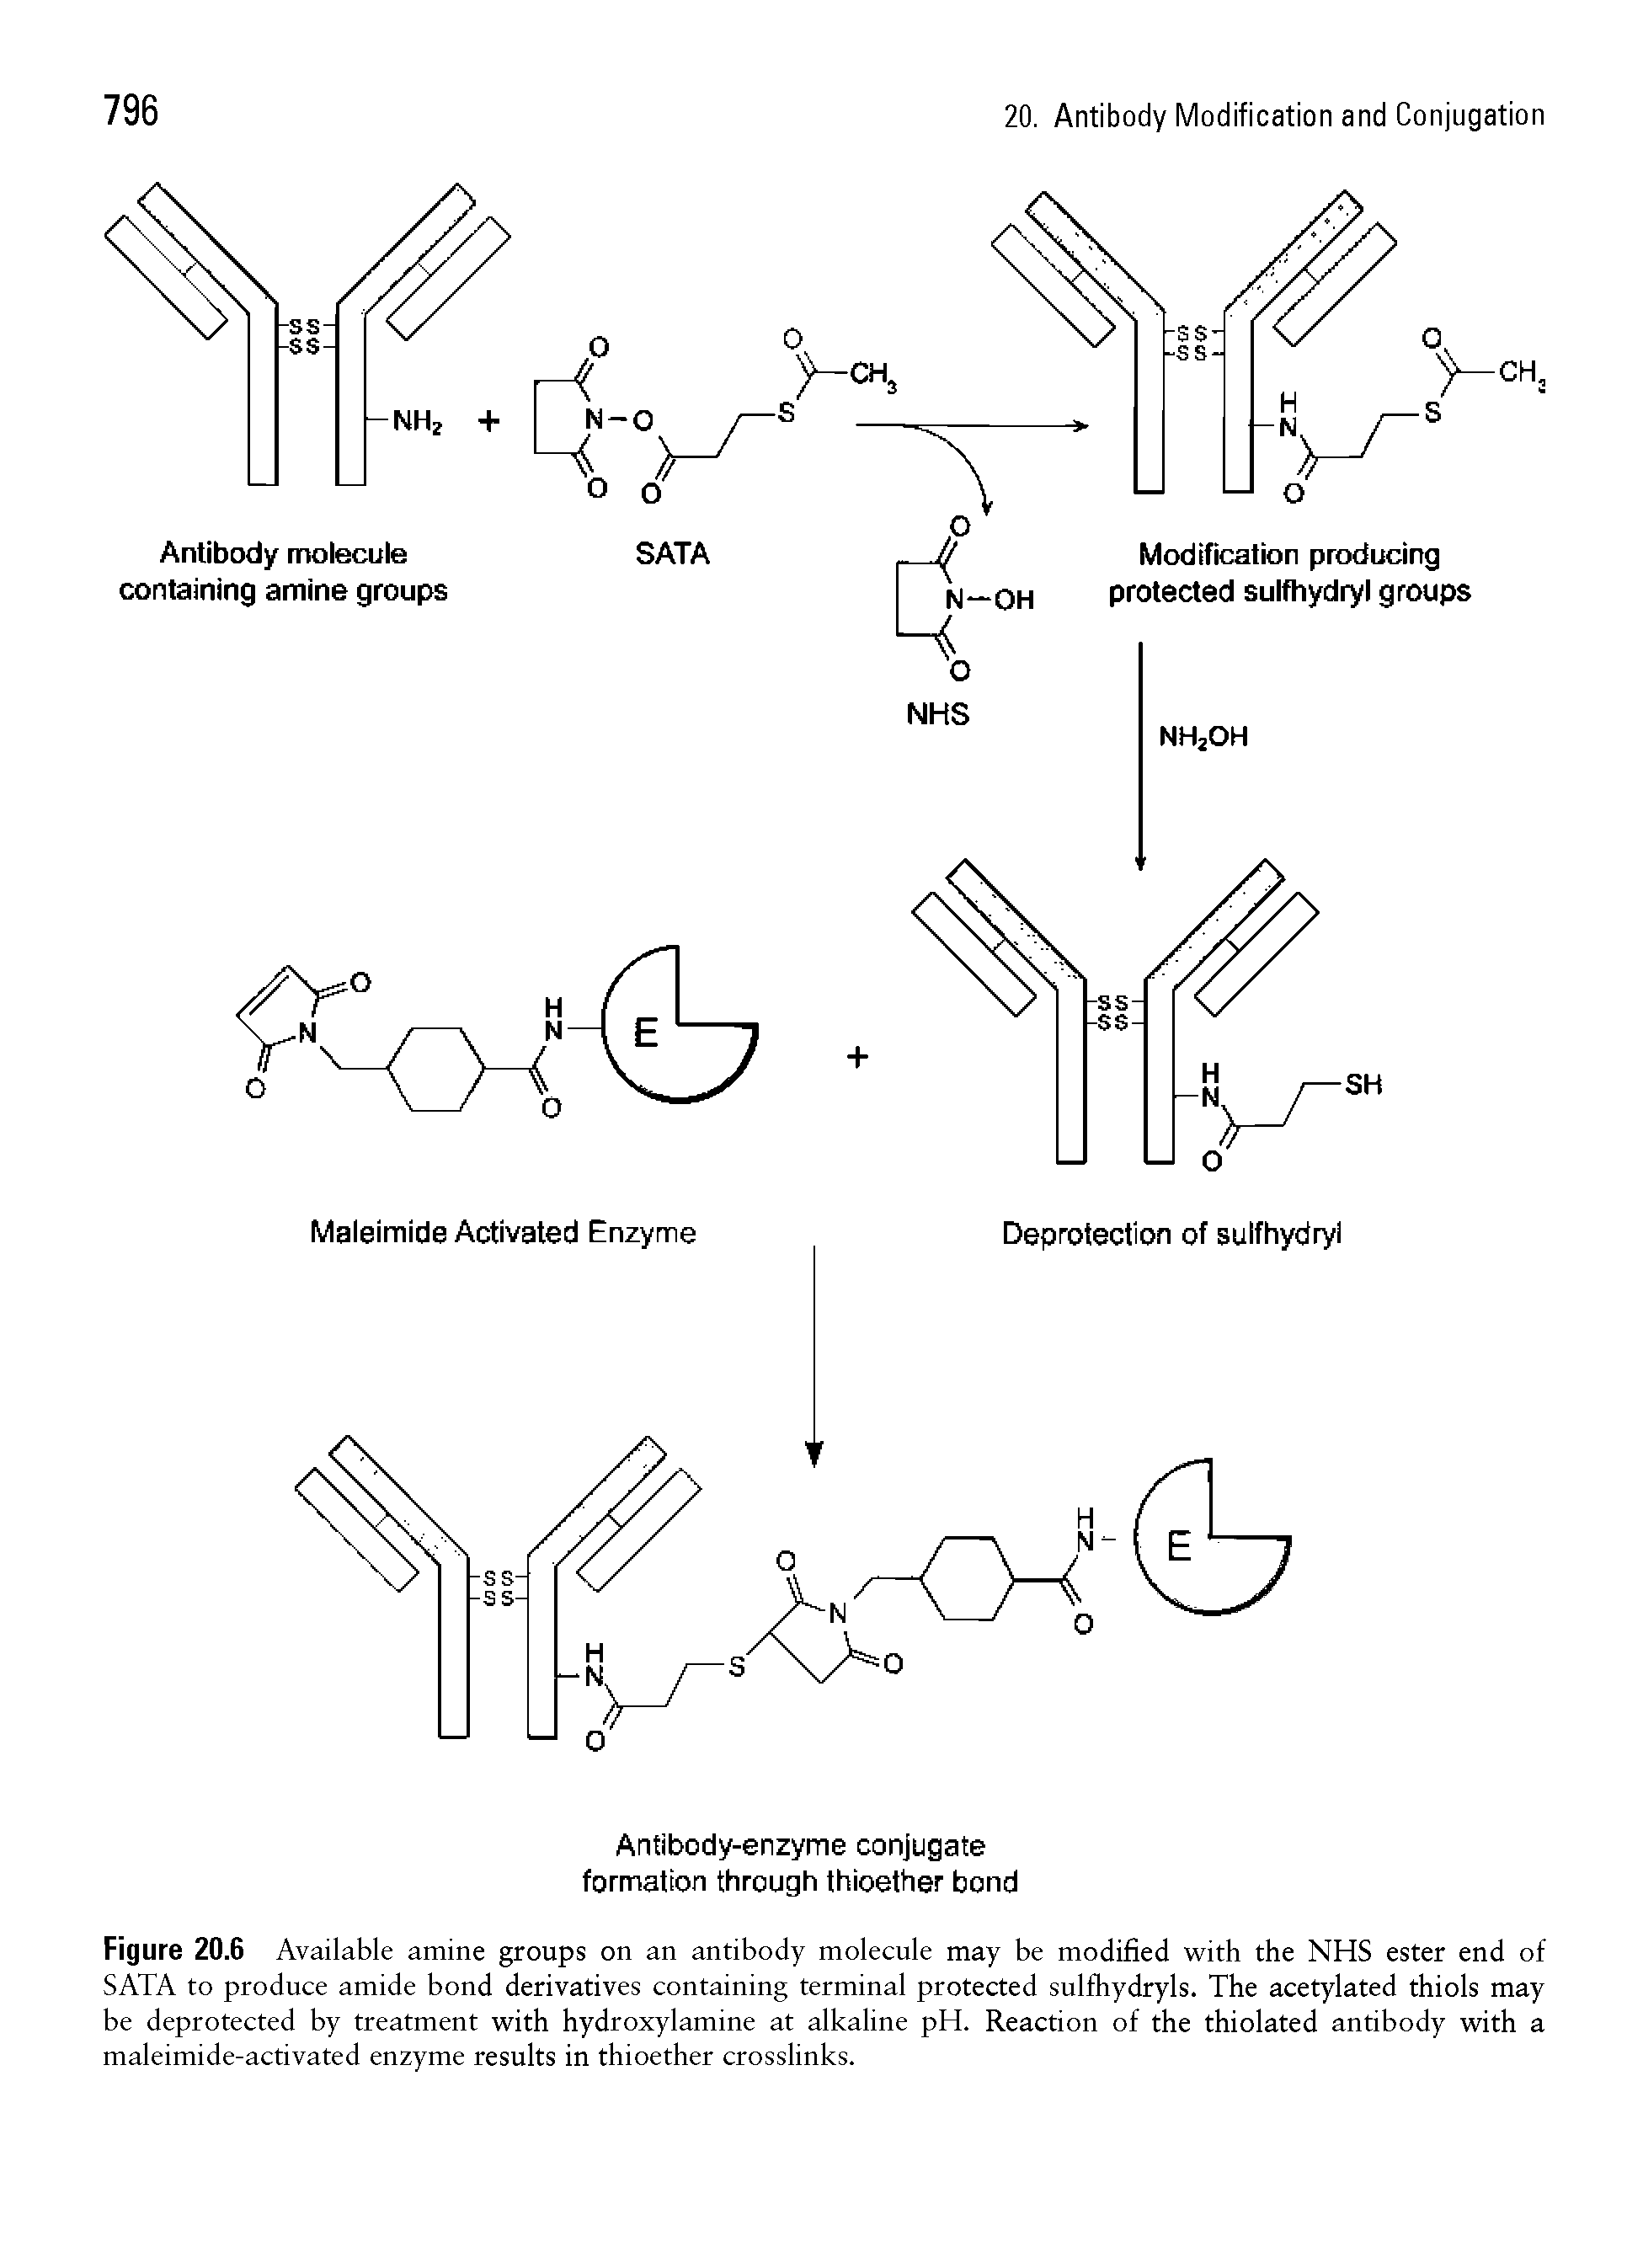 Figure 20.6 Available amine groups on an antibody molecule may be modified with the NHS ester end of SATA to produce amide bond derivatives containing terminal protected sulfhydryls. The acetylated thiols may be deprotected by treatment with hydroxylamine at alkaline pH. Reaction of the thiolated antibody with a maleimide-activated enzyme results in thioether crosslinks.